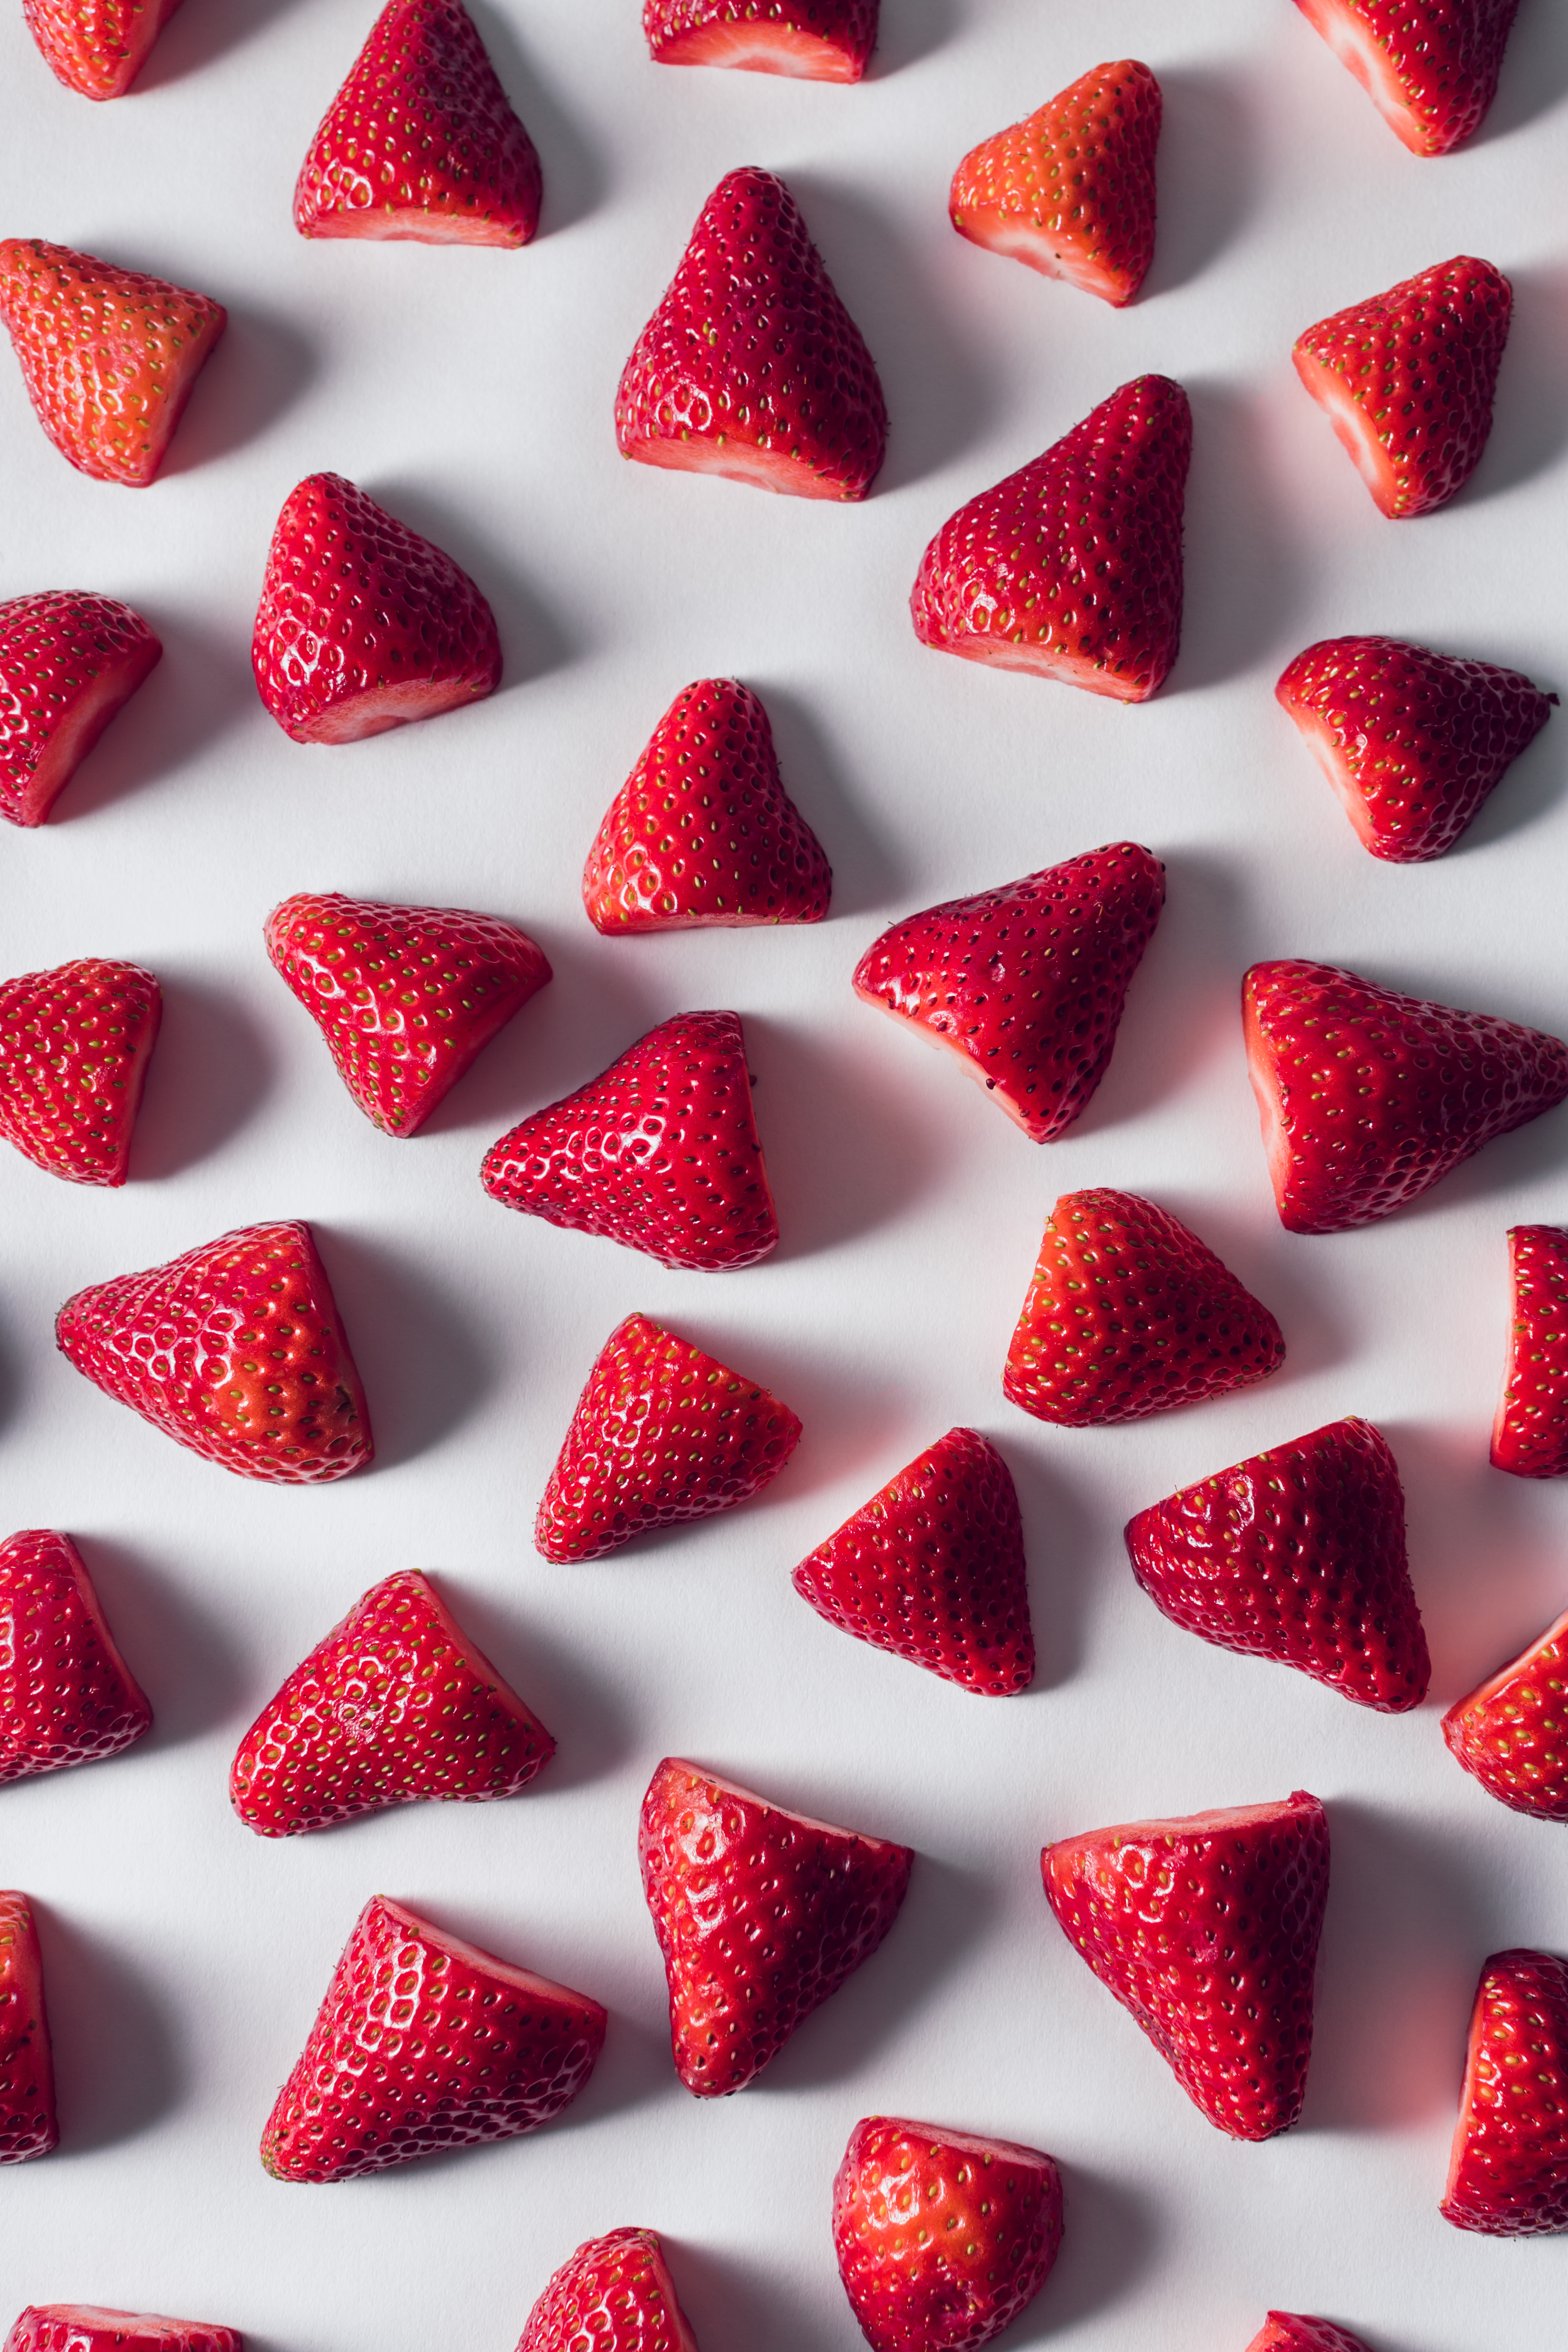 61433 download wallpaper strawberry, berries, minimalism, ripe screensavers and pictures for free